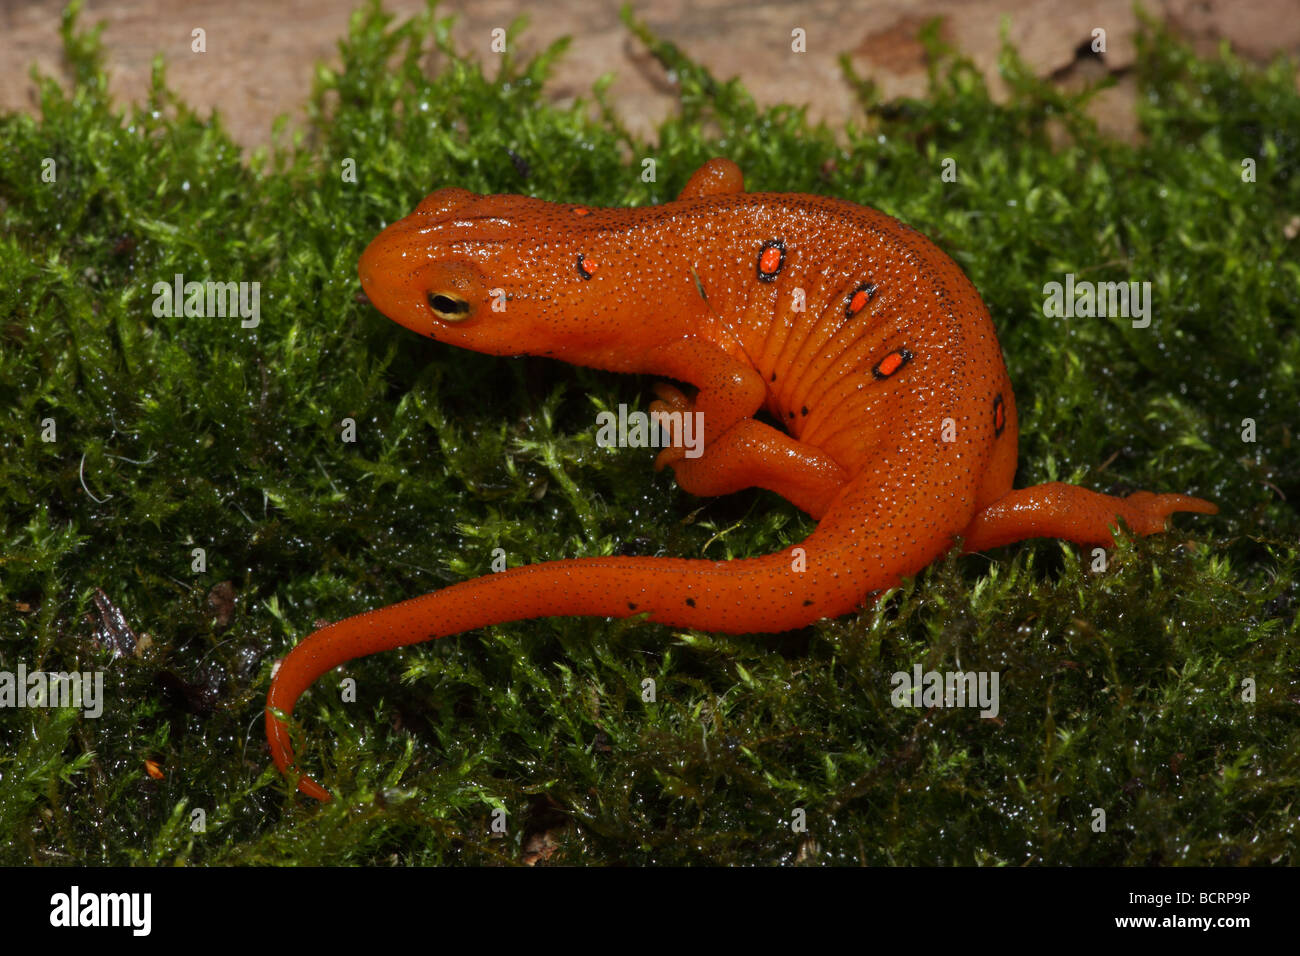 Red Eft - Terrestrial juvenile stage of Red Spotted Newt (Notophthalmus viridescens viridescens) New York - USA Stock Photo